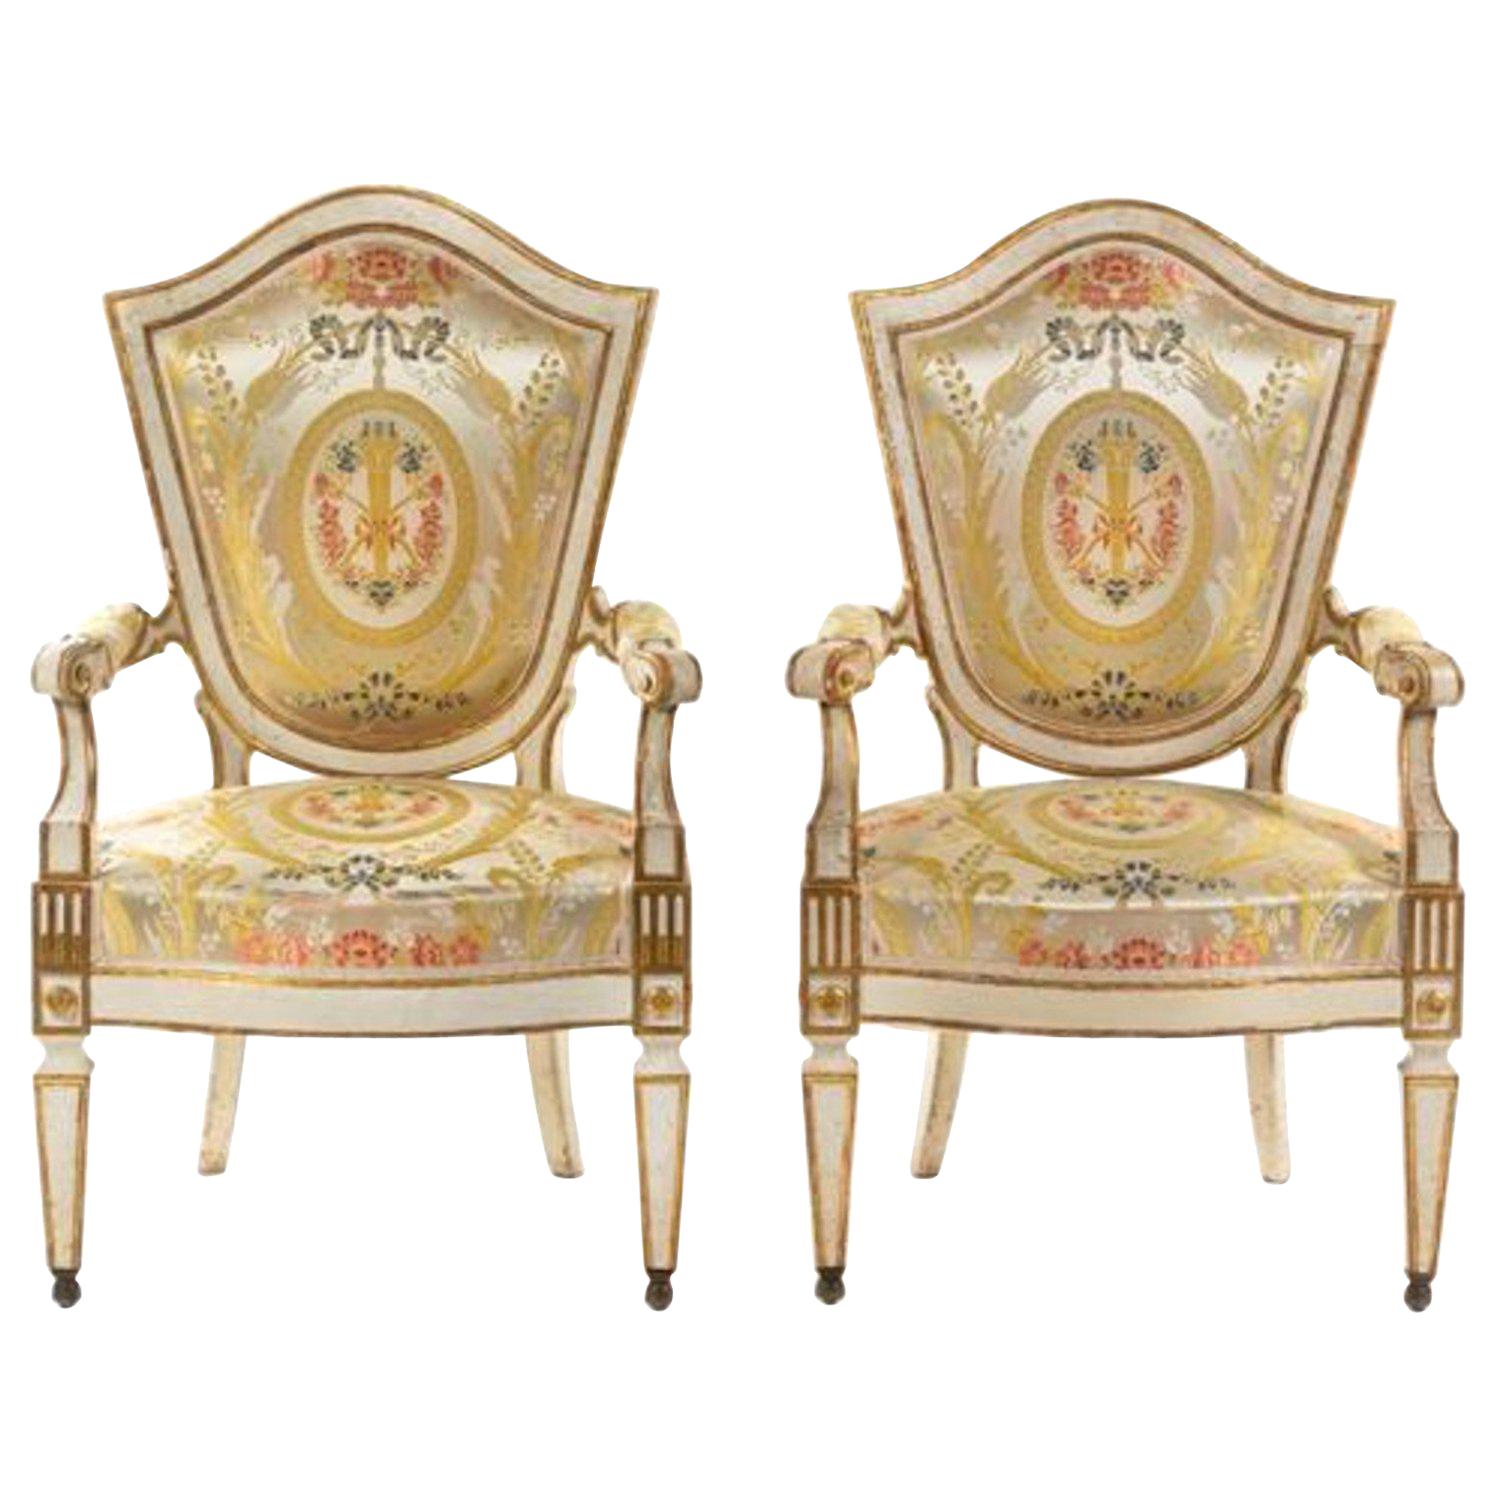 Important Pair of Italian Painted Fauteuils Florence, 18th Century